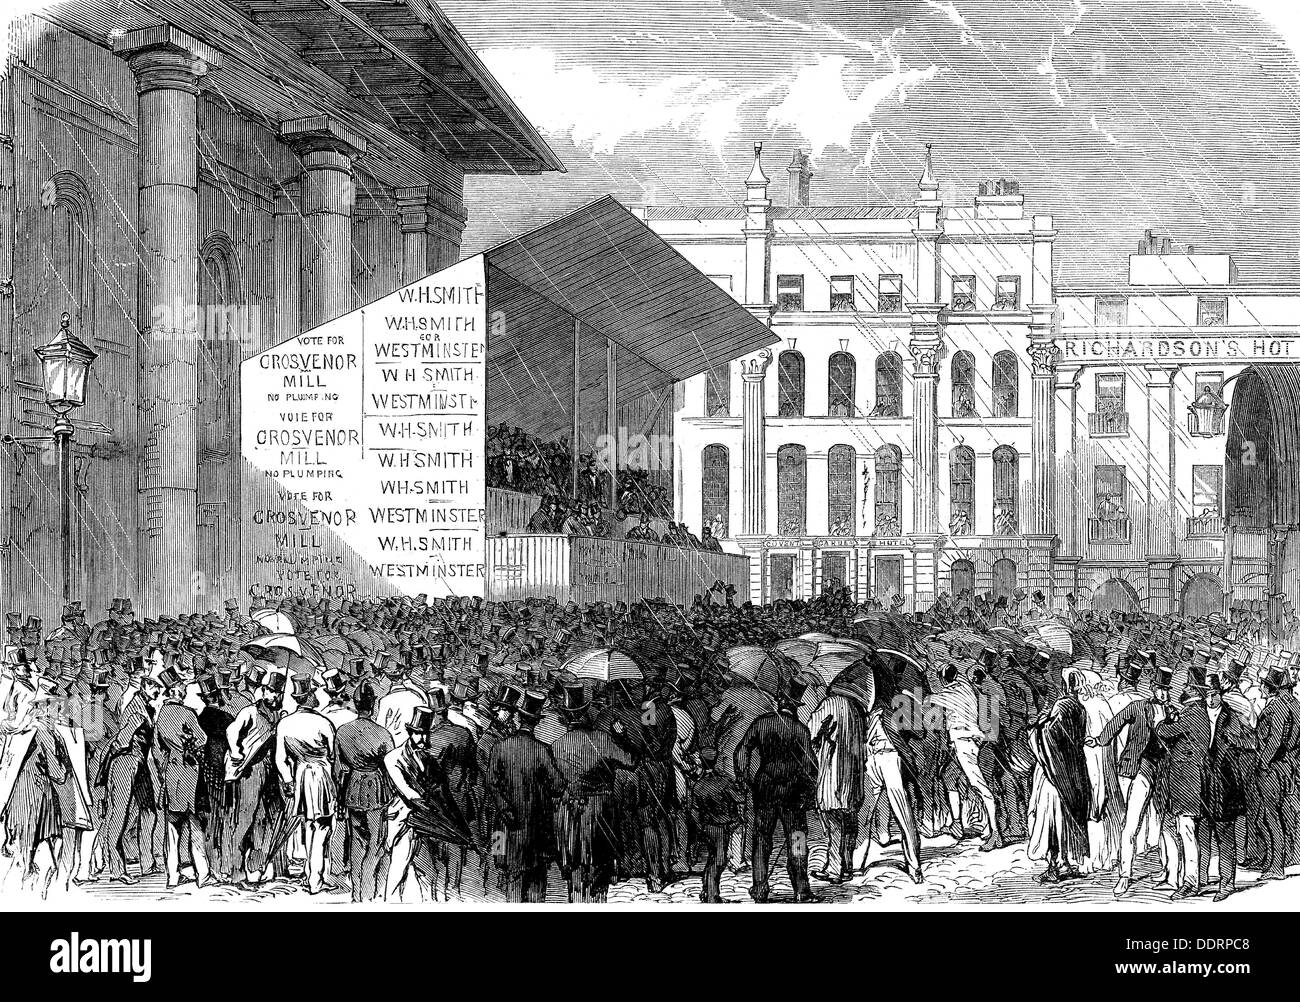 politics, elections, parliamentary elections in Great Britain, 1868, Additional-Rights-Clearences-Not Available Stock Photo